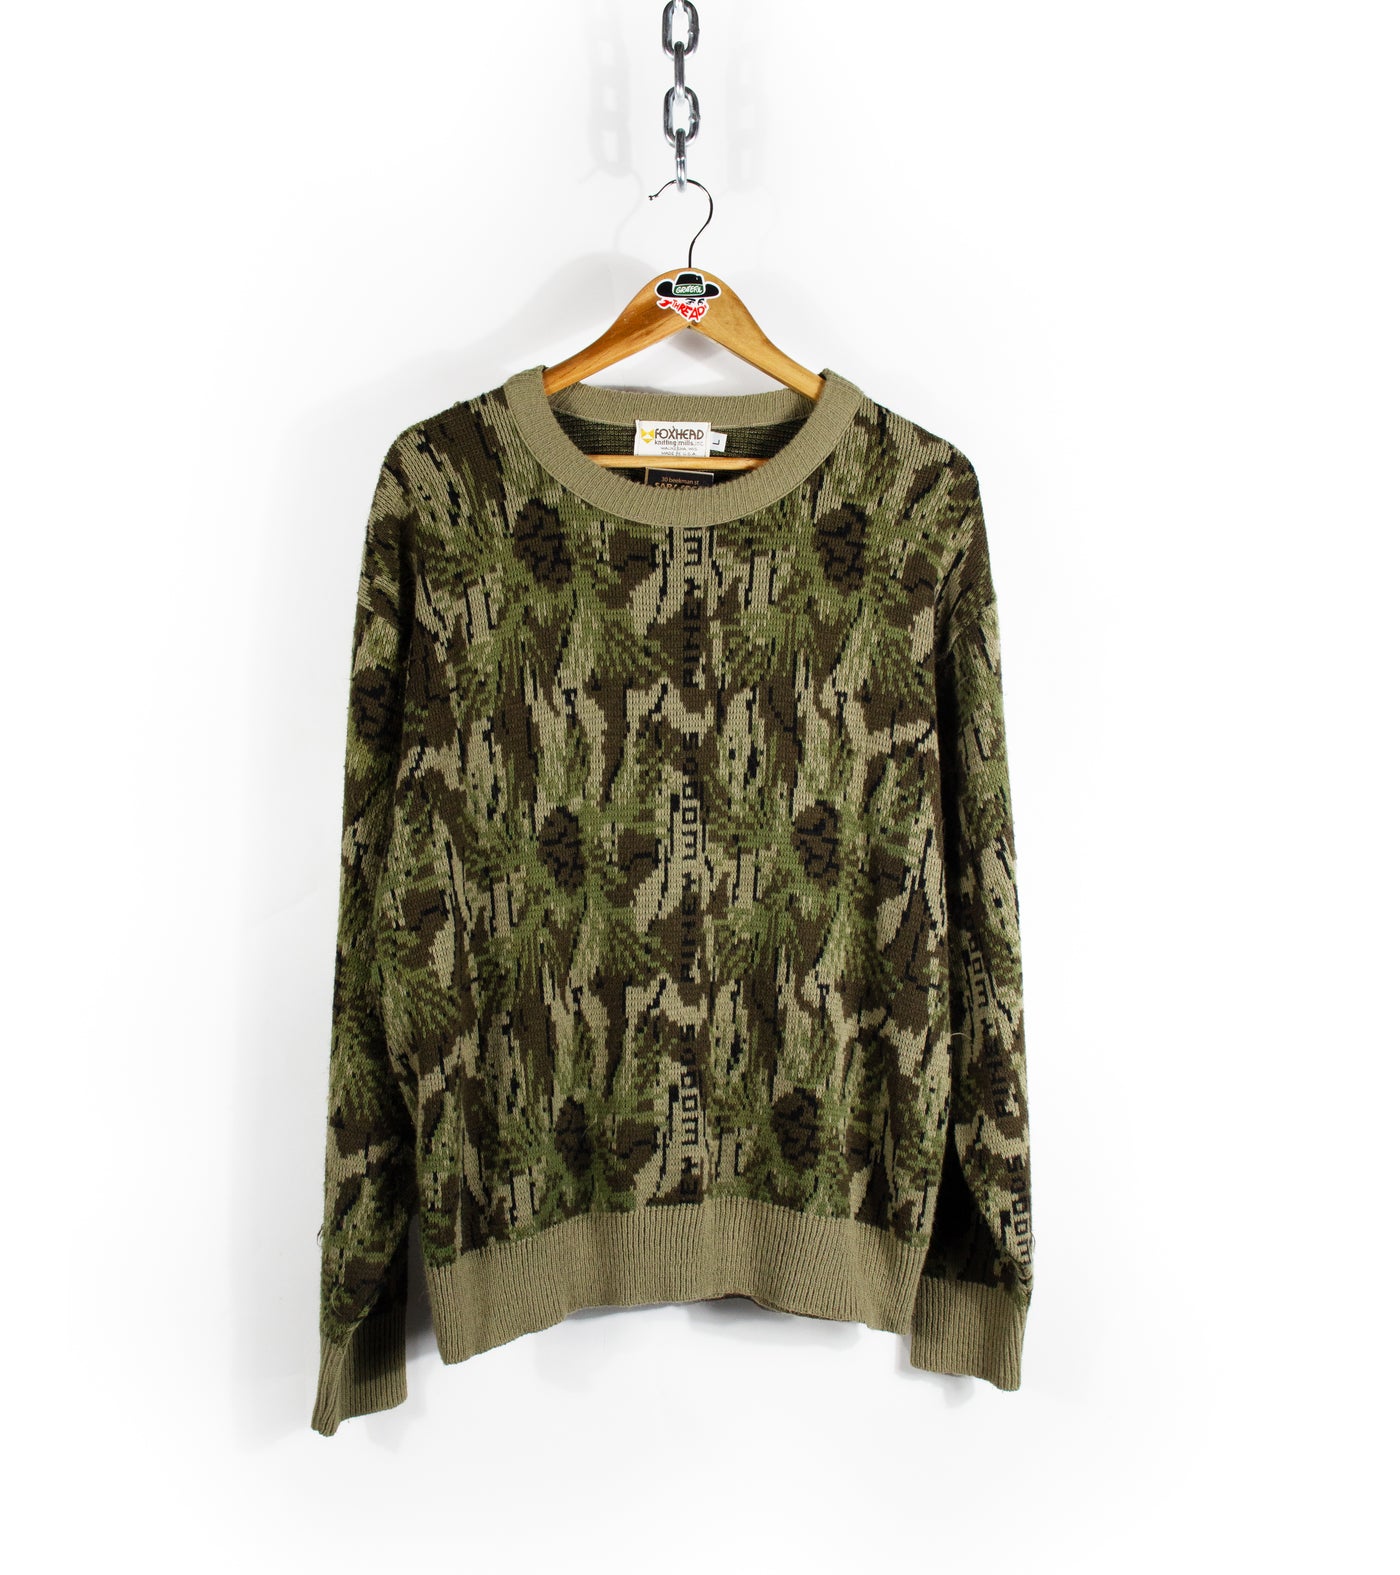 Vintage 80s Foxhead 'Piney Woods' Camo Knit Sweater